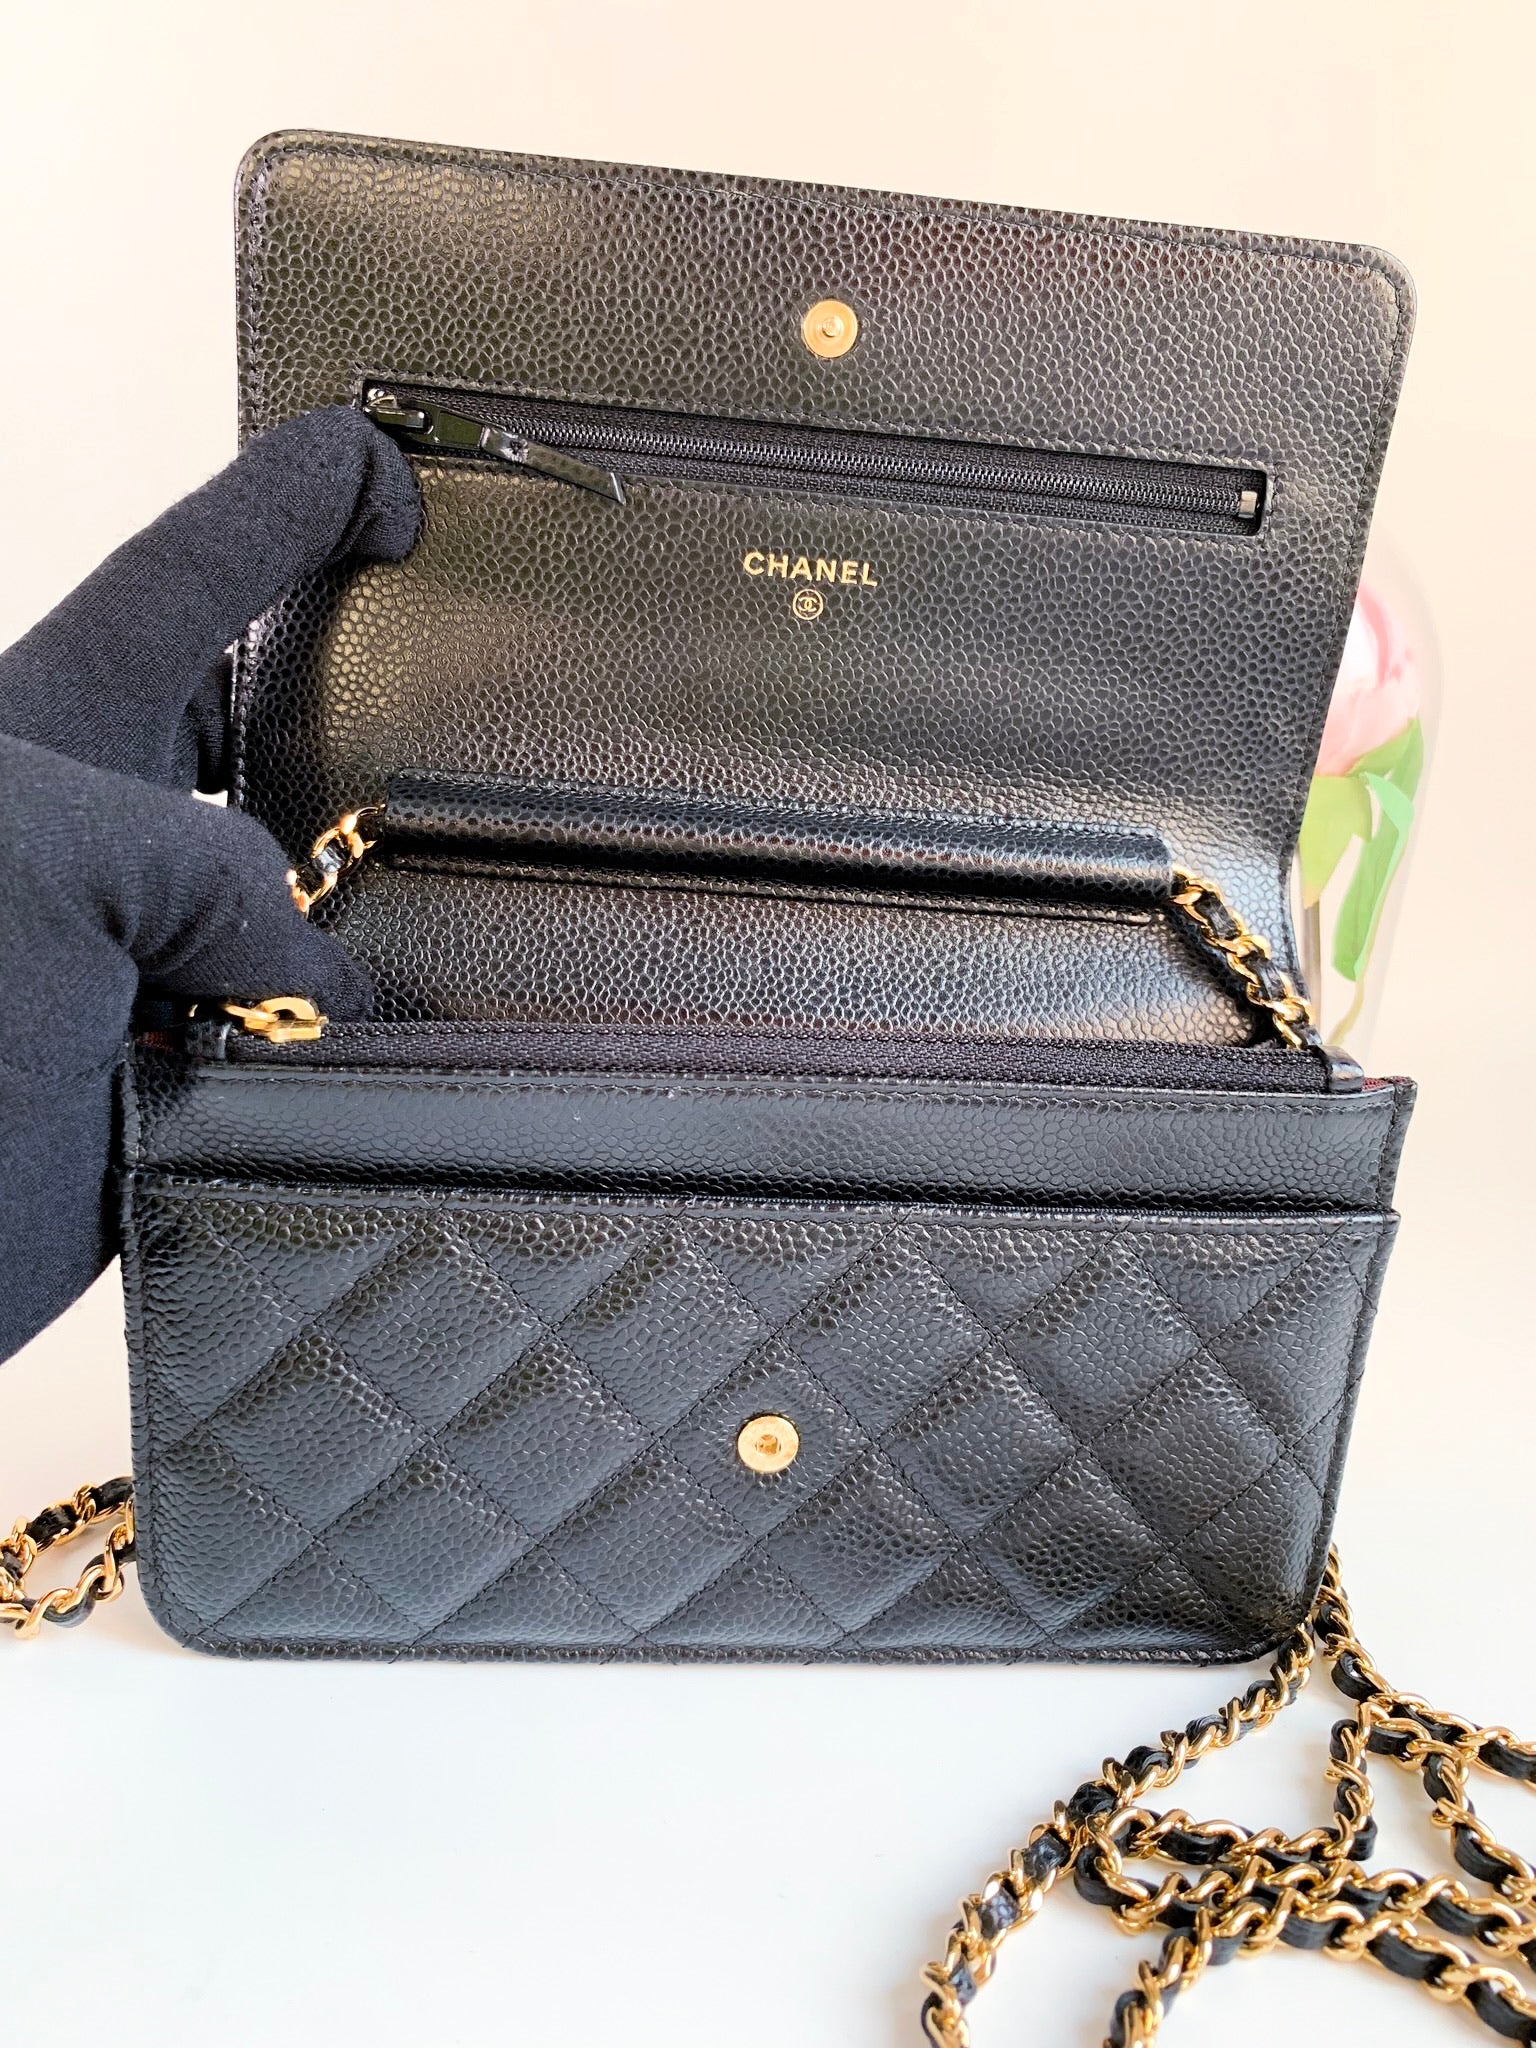 CHANEL Wallet on Chain (WOC) 2021 in black caviar with gold hardware,  review of the new improvements 